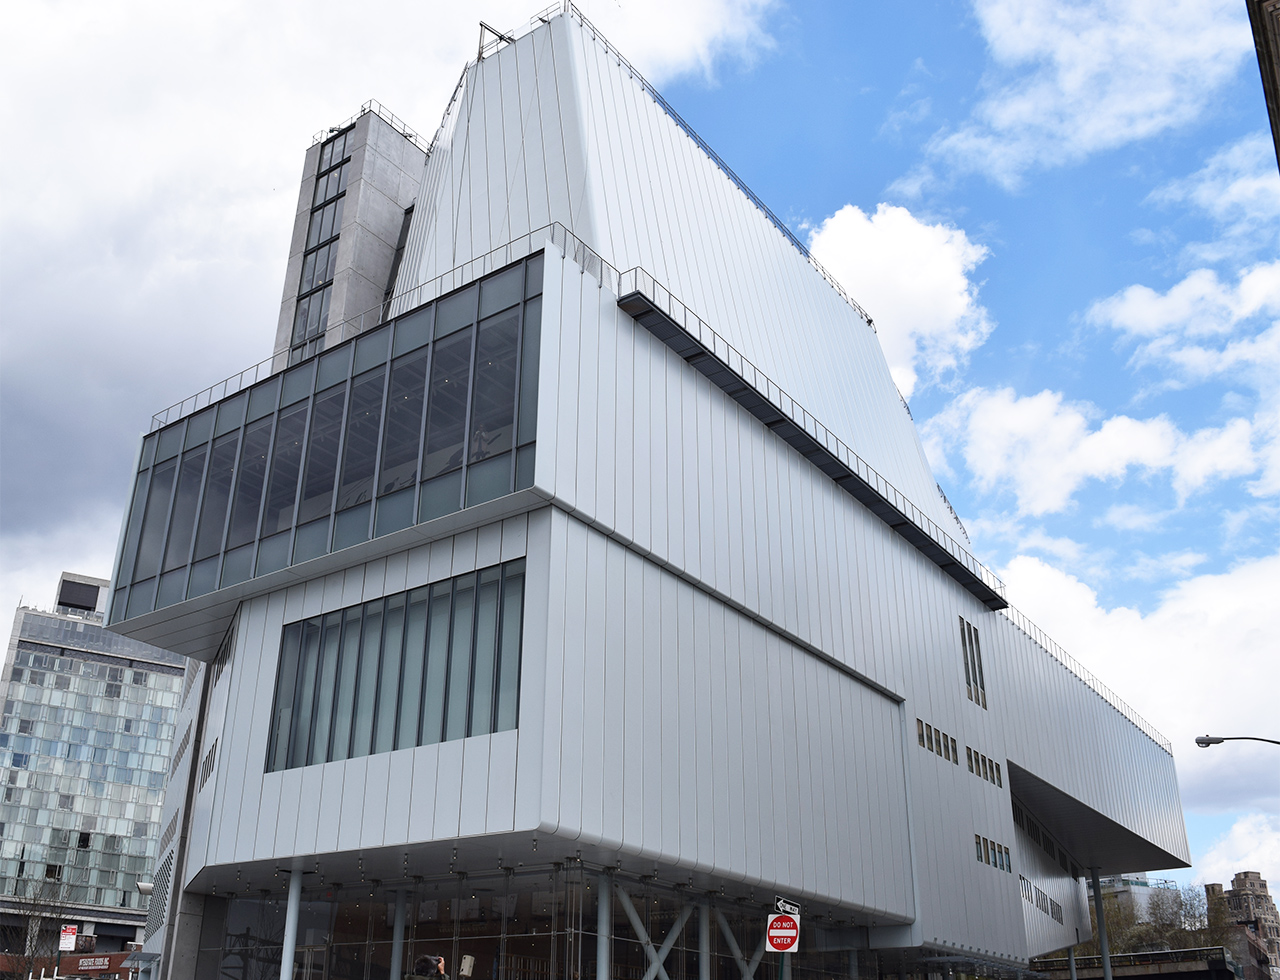 The exterior of the new Whitney Museum (all photos by the author for Hyperallergic)